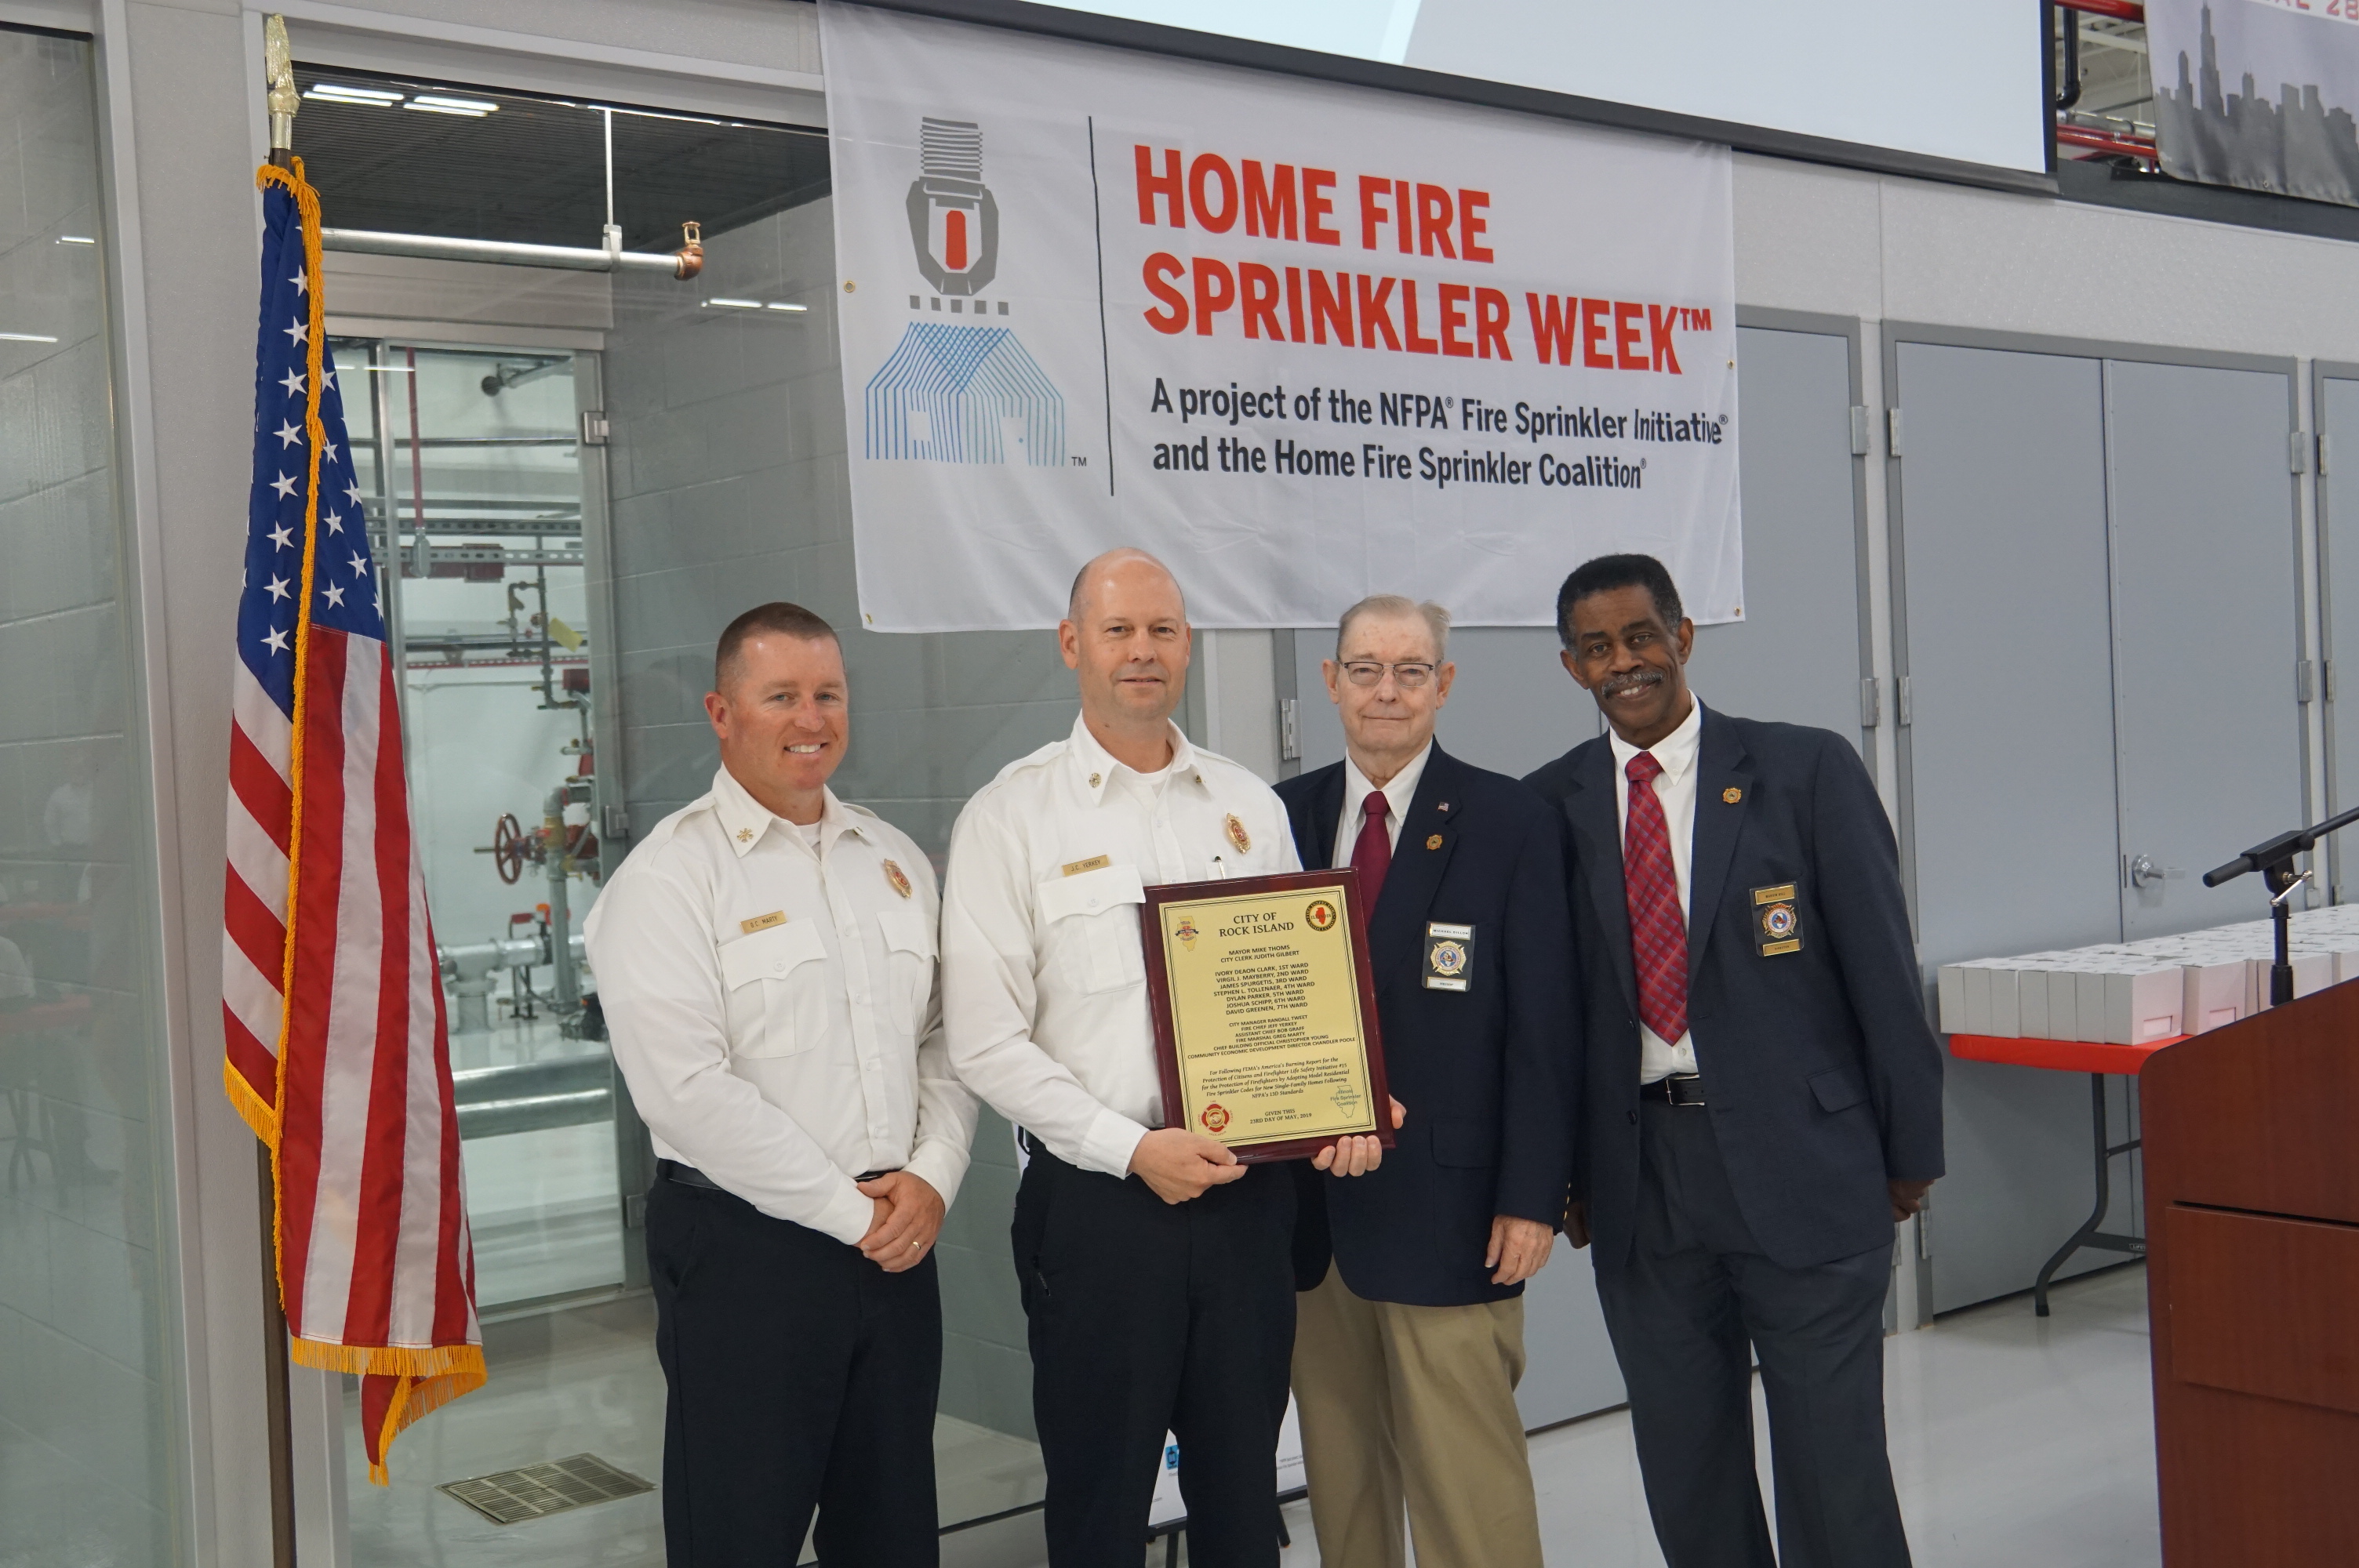 Rock Island Fire District recognition award presented to Fire Chief Jeff Yerkey and Fire Marshal Greg Marty by Director Marvin Hill (also a Trustee for the Barrington-Countryside Fire Protection District) and President Michael Dillon with the Illinois Association of Fire Protection Districts.